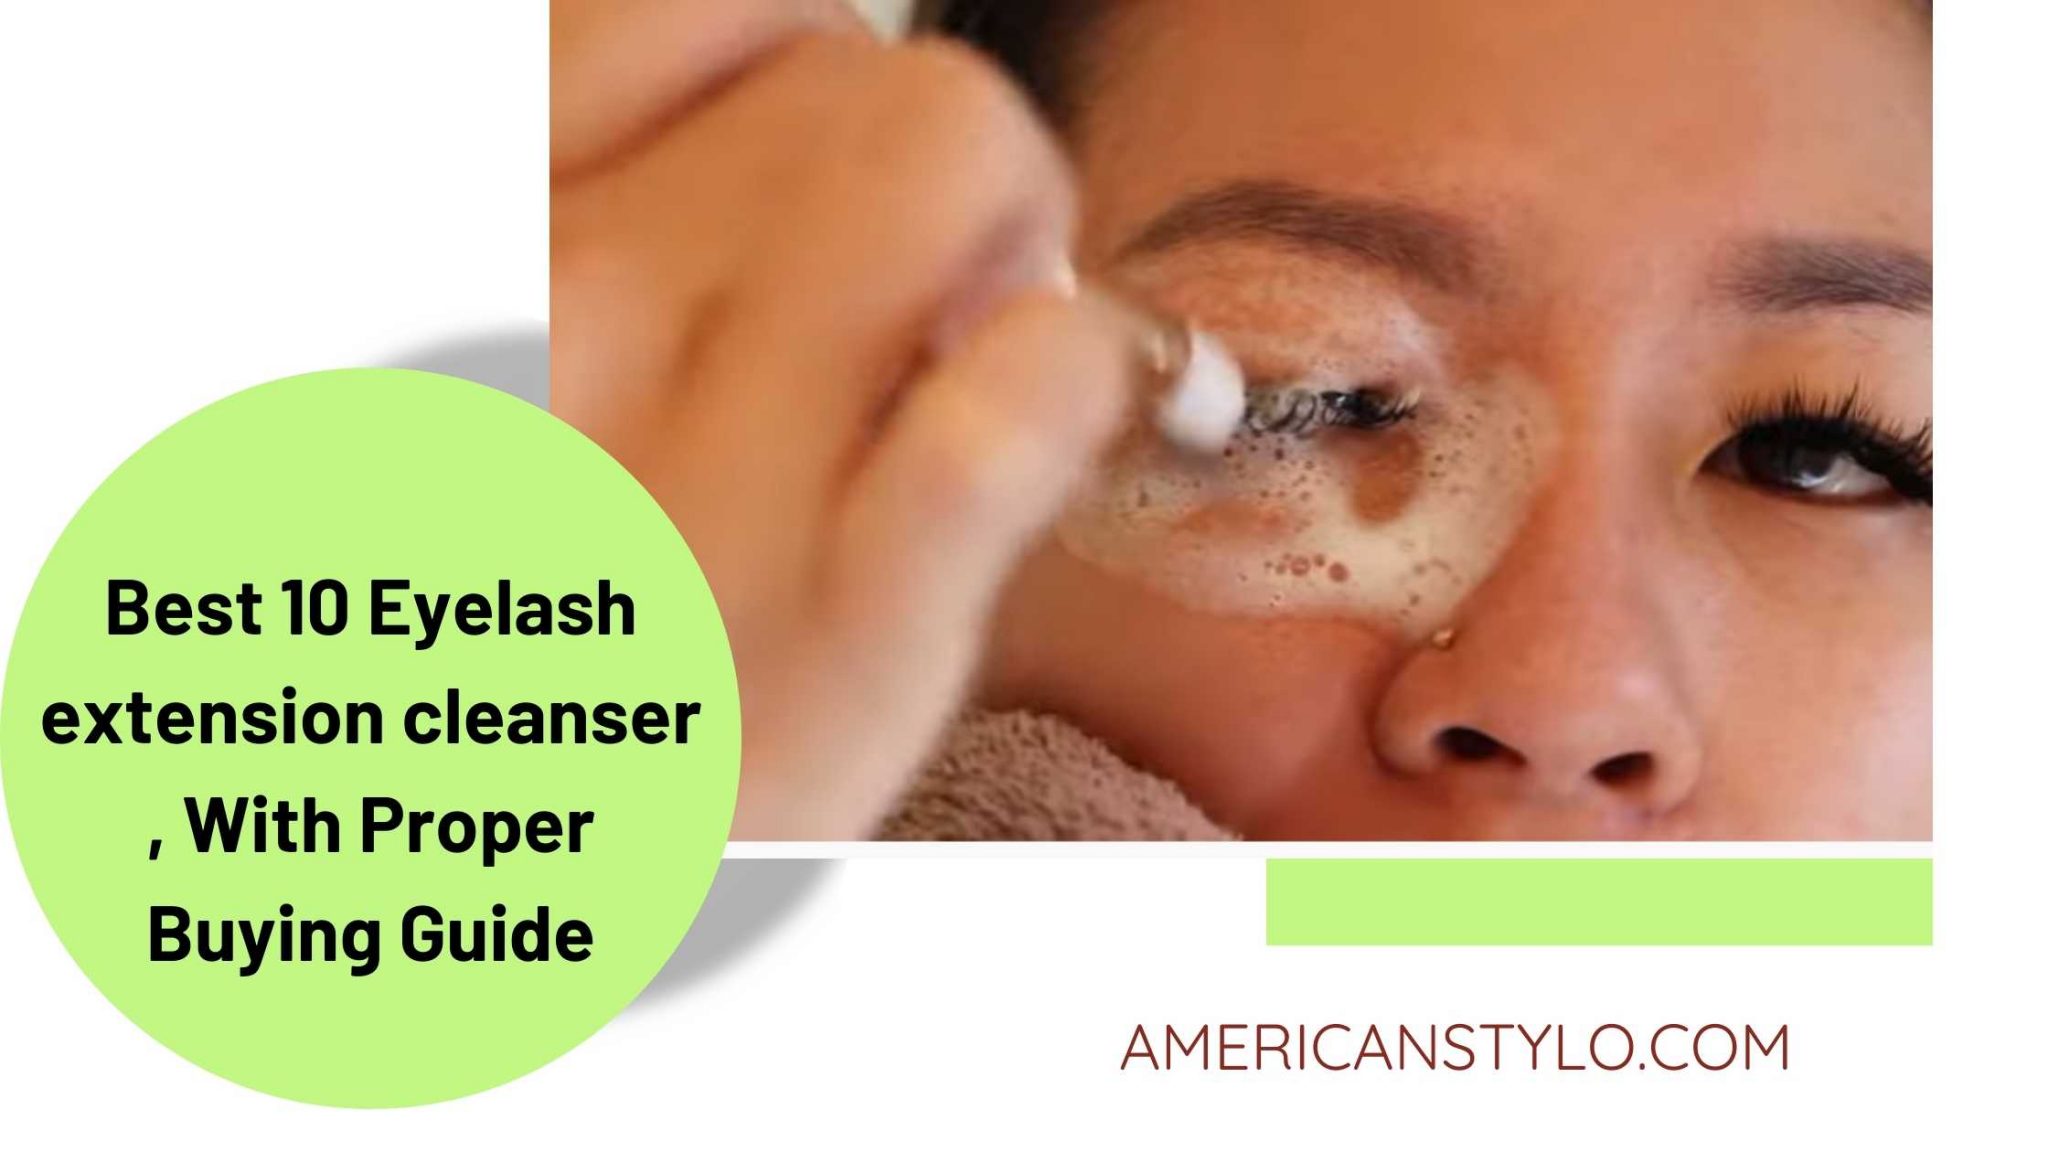 Discover the Top 10 Eyelash Extension Cleansers with Expert Buying Advice